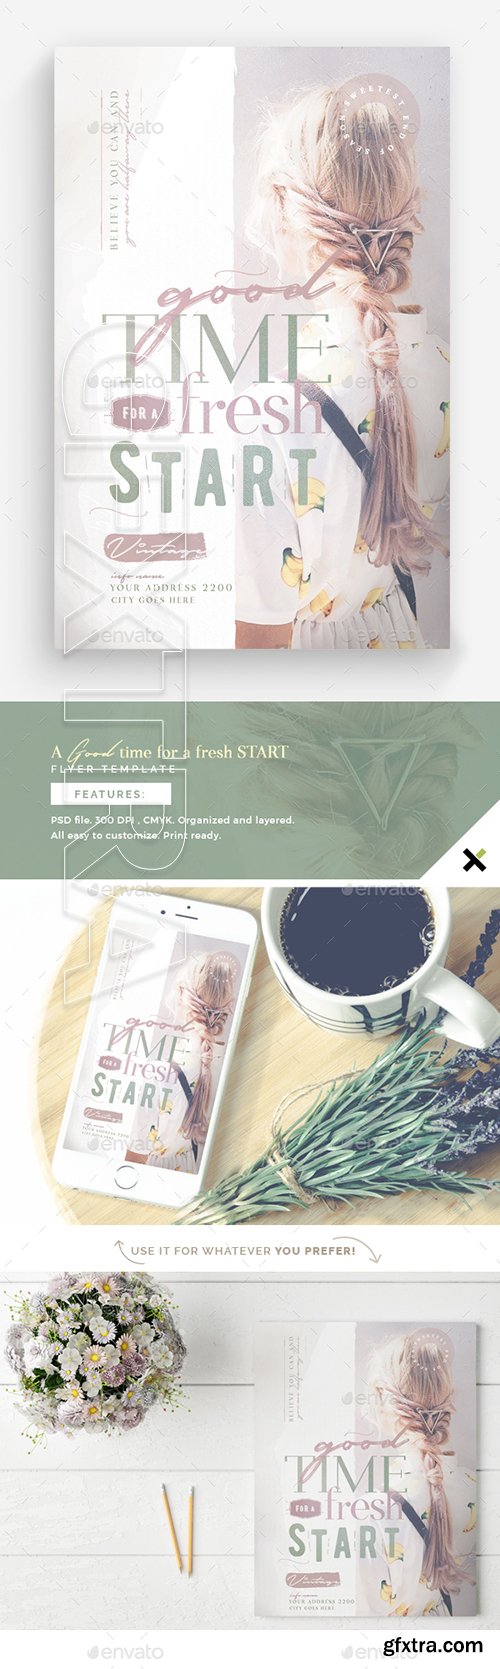 GraphicRiver - A Good Time For A Fresh Start Flyer Template 22784685